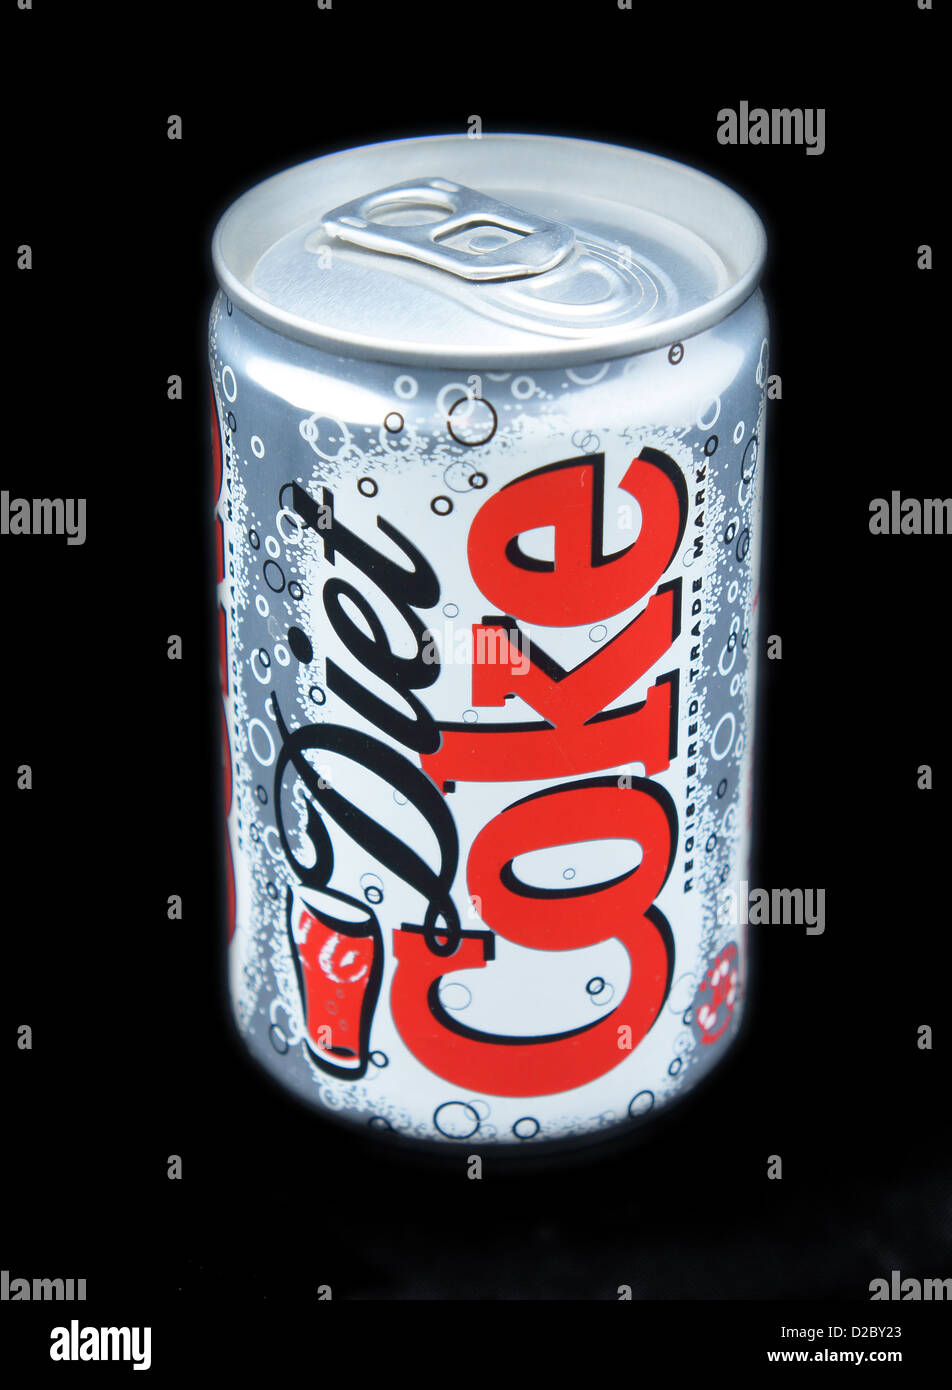 Small Size Diet Coke Can Stock Photo